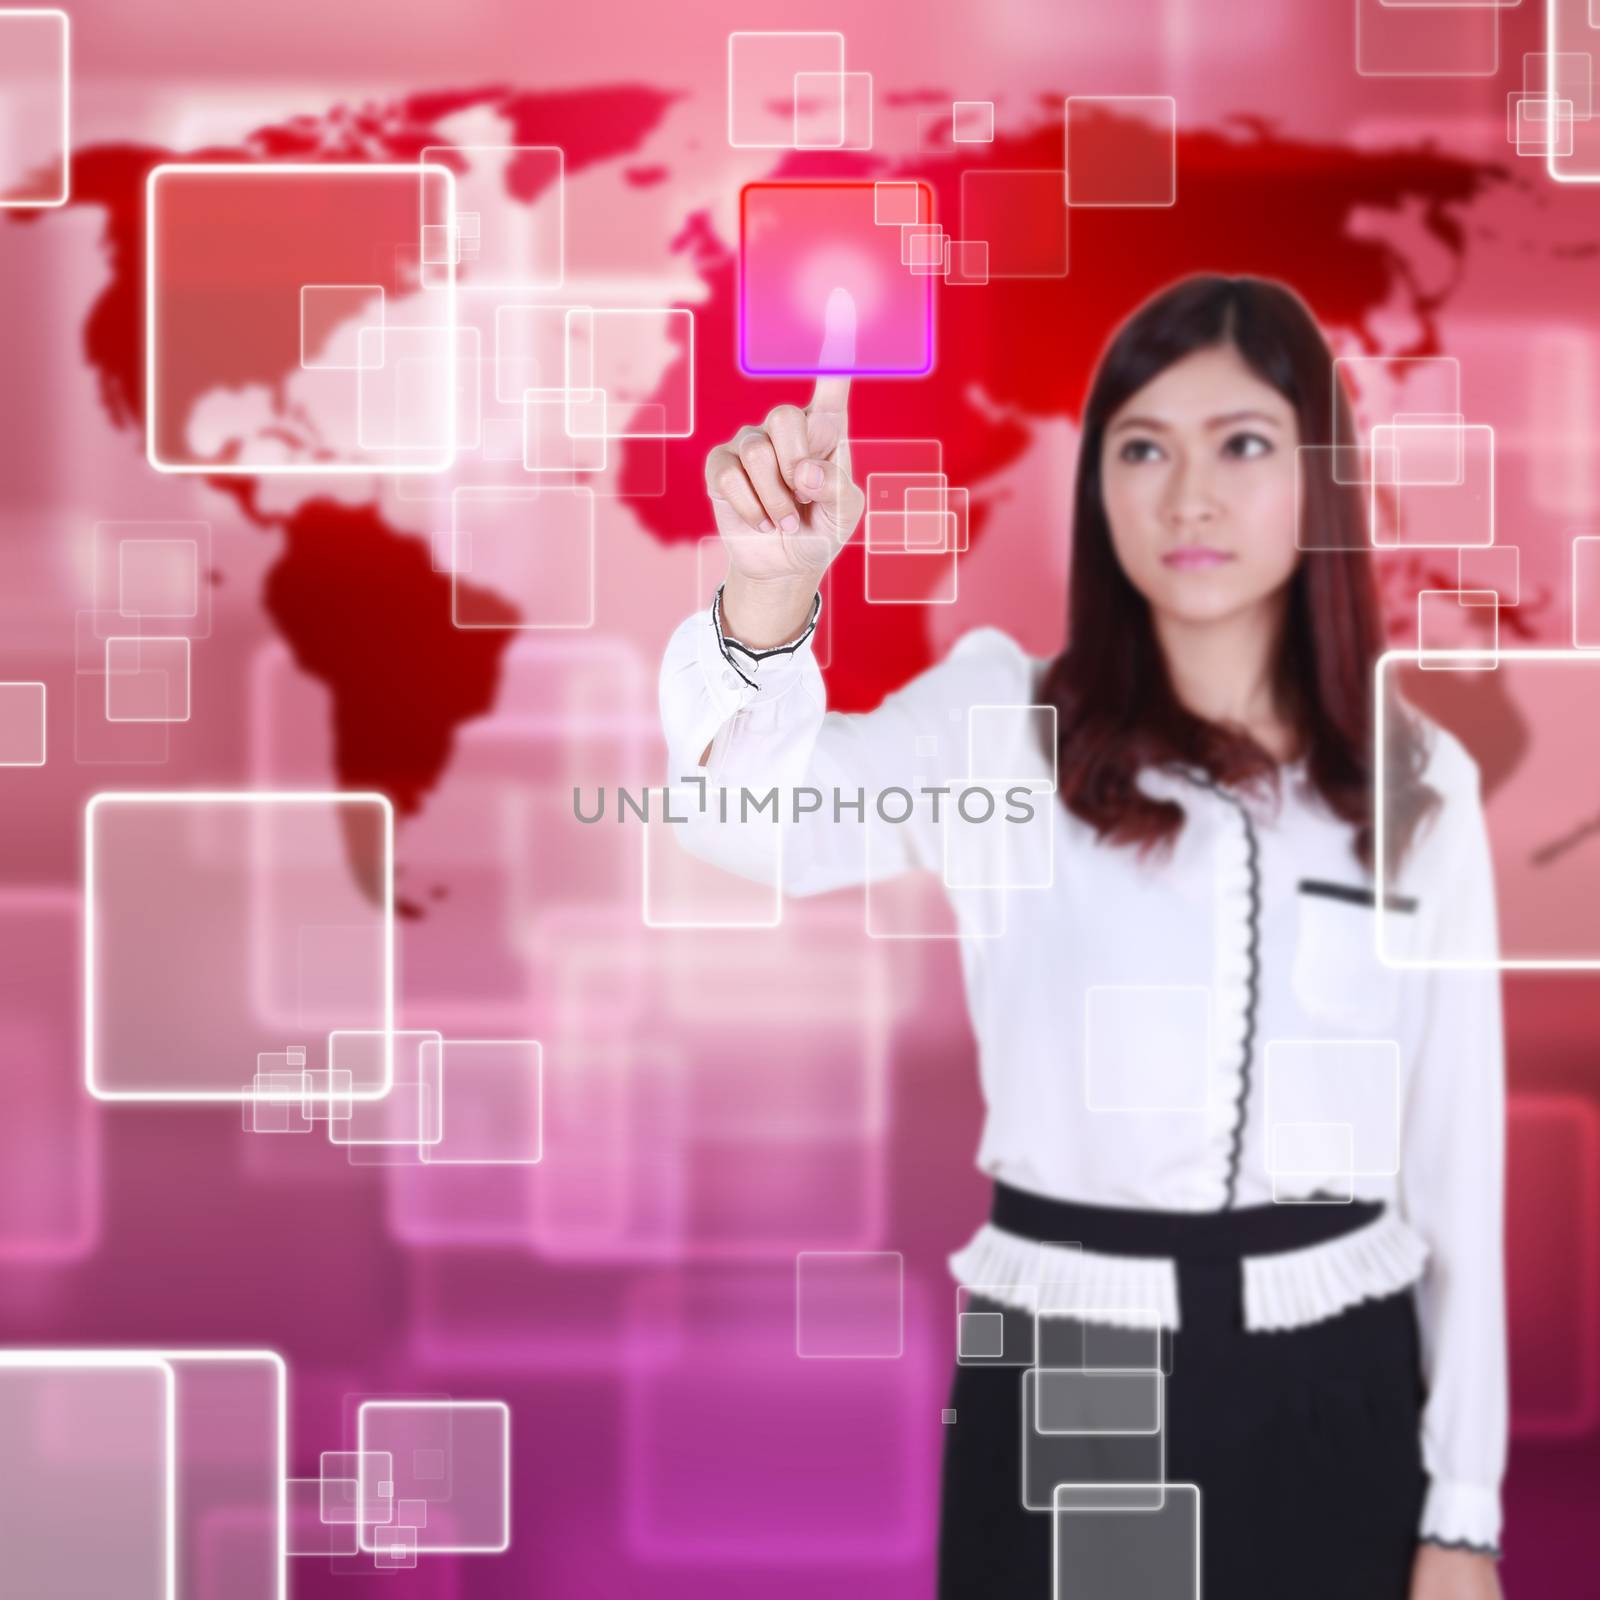 woman pushing button on a touch screen interface